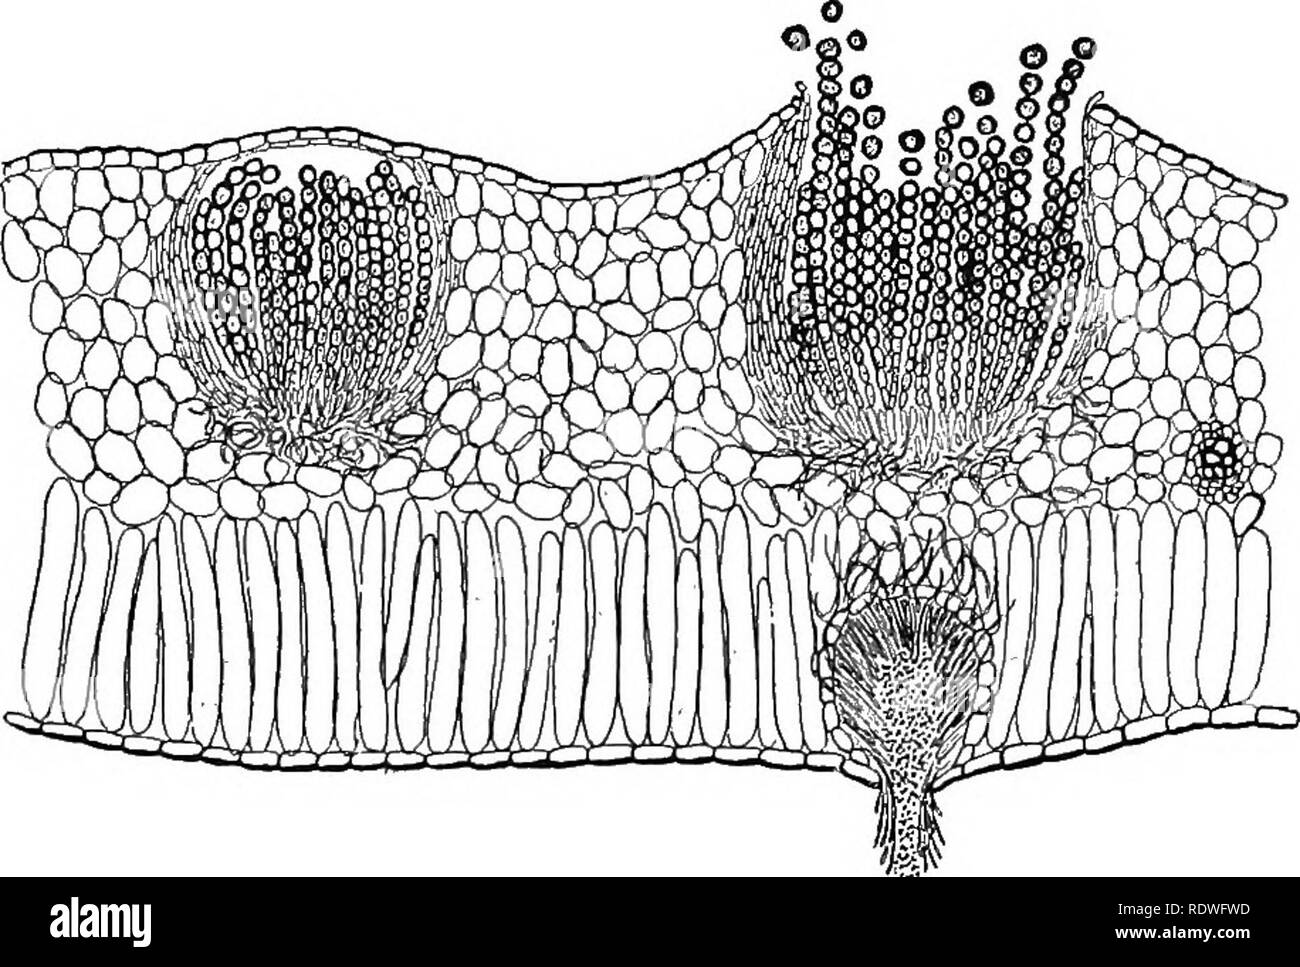 . Nature and development of plants. Botany. 252 DEVELOPMENT OF A RUST bodies which rupture the epidermis and finally open out into cups filled with chains of yellowish spores. An examination of Fig. 162 shows that these spores are formed in rows at the end of hyphae and surrounded by a layer of rather thick-walled hyphae. This stage of the rust is known as the cluster cup or aecial stage and the spores are called aeciospores. Often smaller spore-bear?. ^. Fig. 162. Cluster cups as seen in section of leaf of spring beauty, Clay- tonia. At right one of the cups is ruptured, exposing the aeciospo Stock Photo